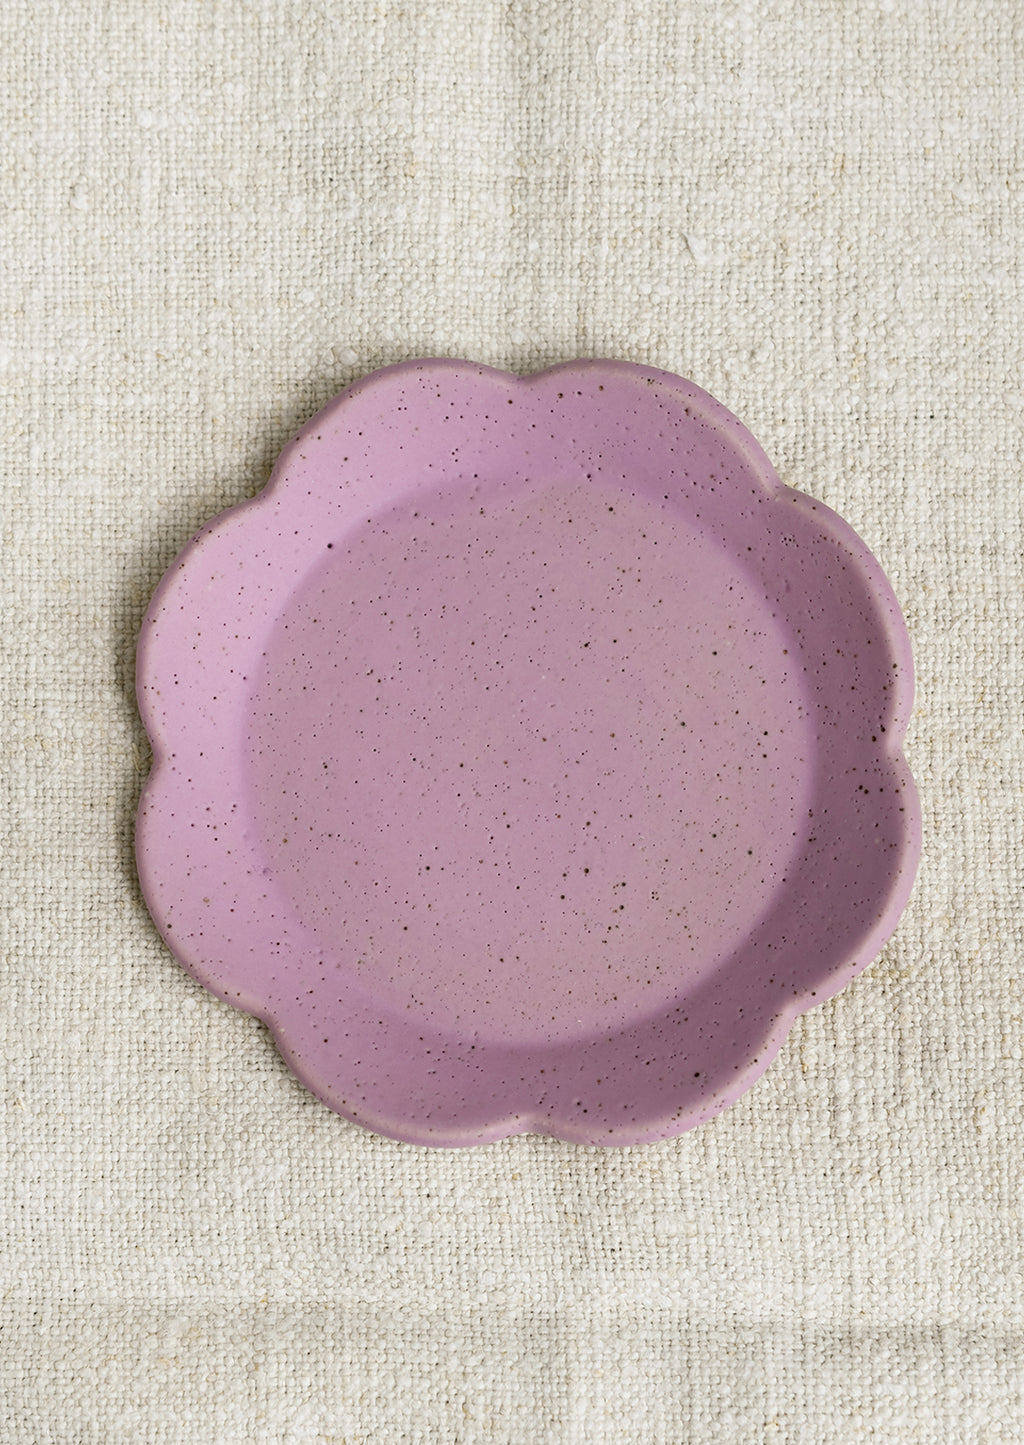 Lavender: A floral shaped trinket dish in purple.